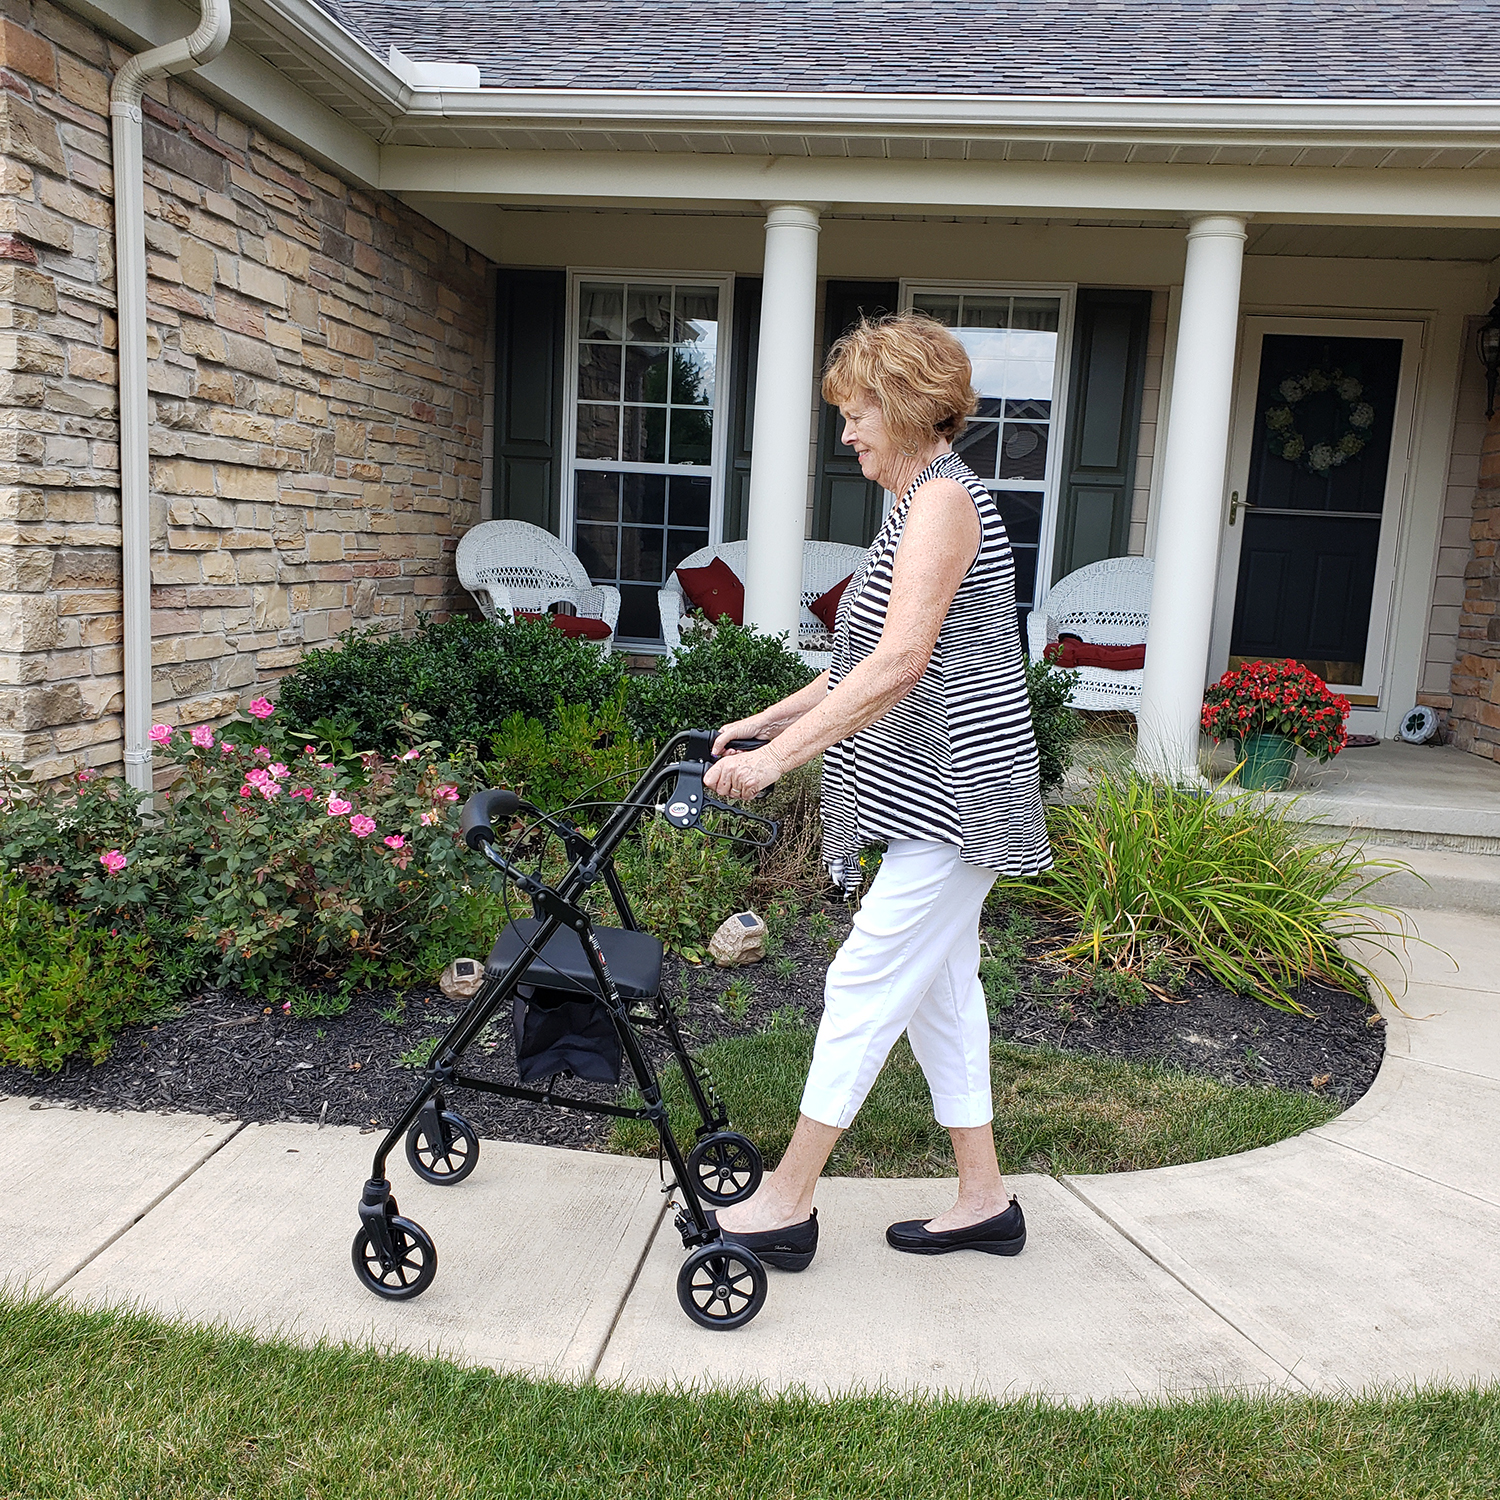 Equate Rolling Walker for Seniors, Rollator with Seat and Wheels, Black, 350 lb Capacity - image 2 of 9